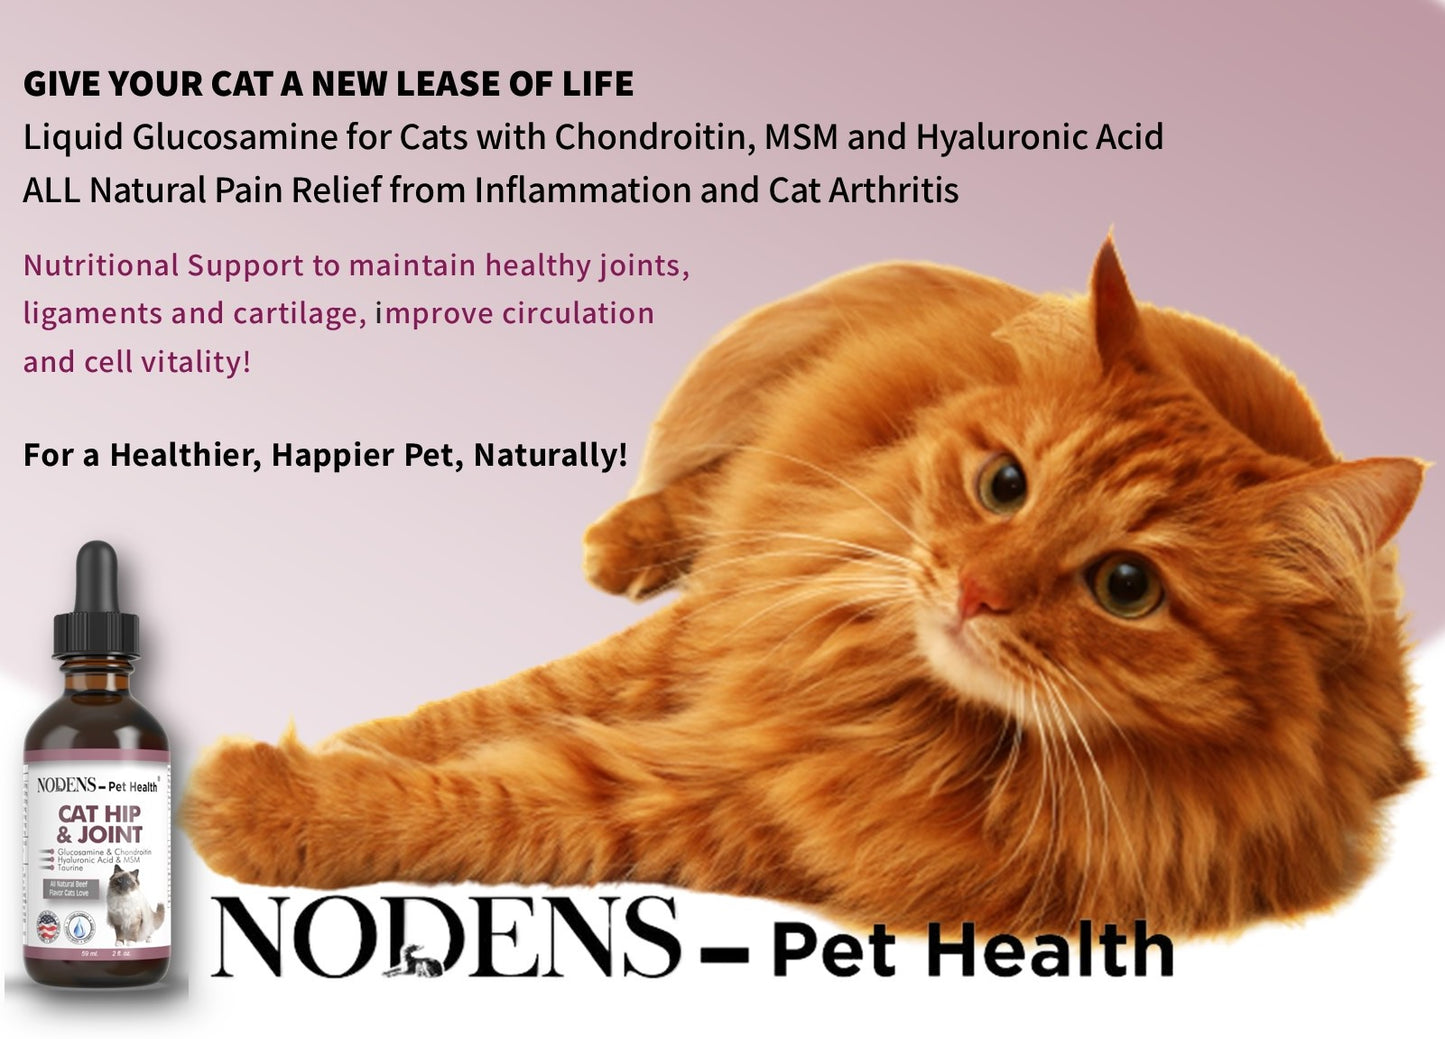 NODENS CAT Hip and Joint Liquid Glucosamine for Cats with Chondroitin and Opti-MSM® Hyaluronic Acid